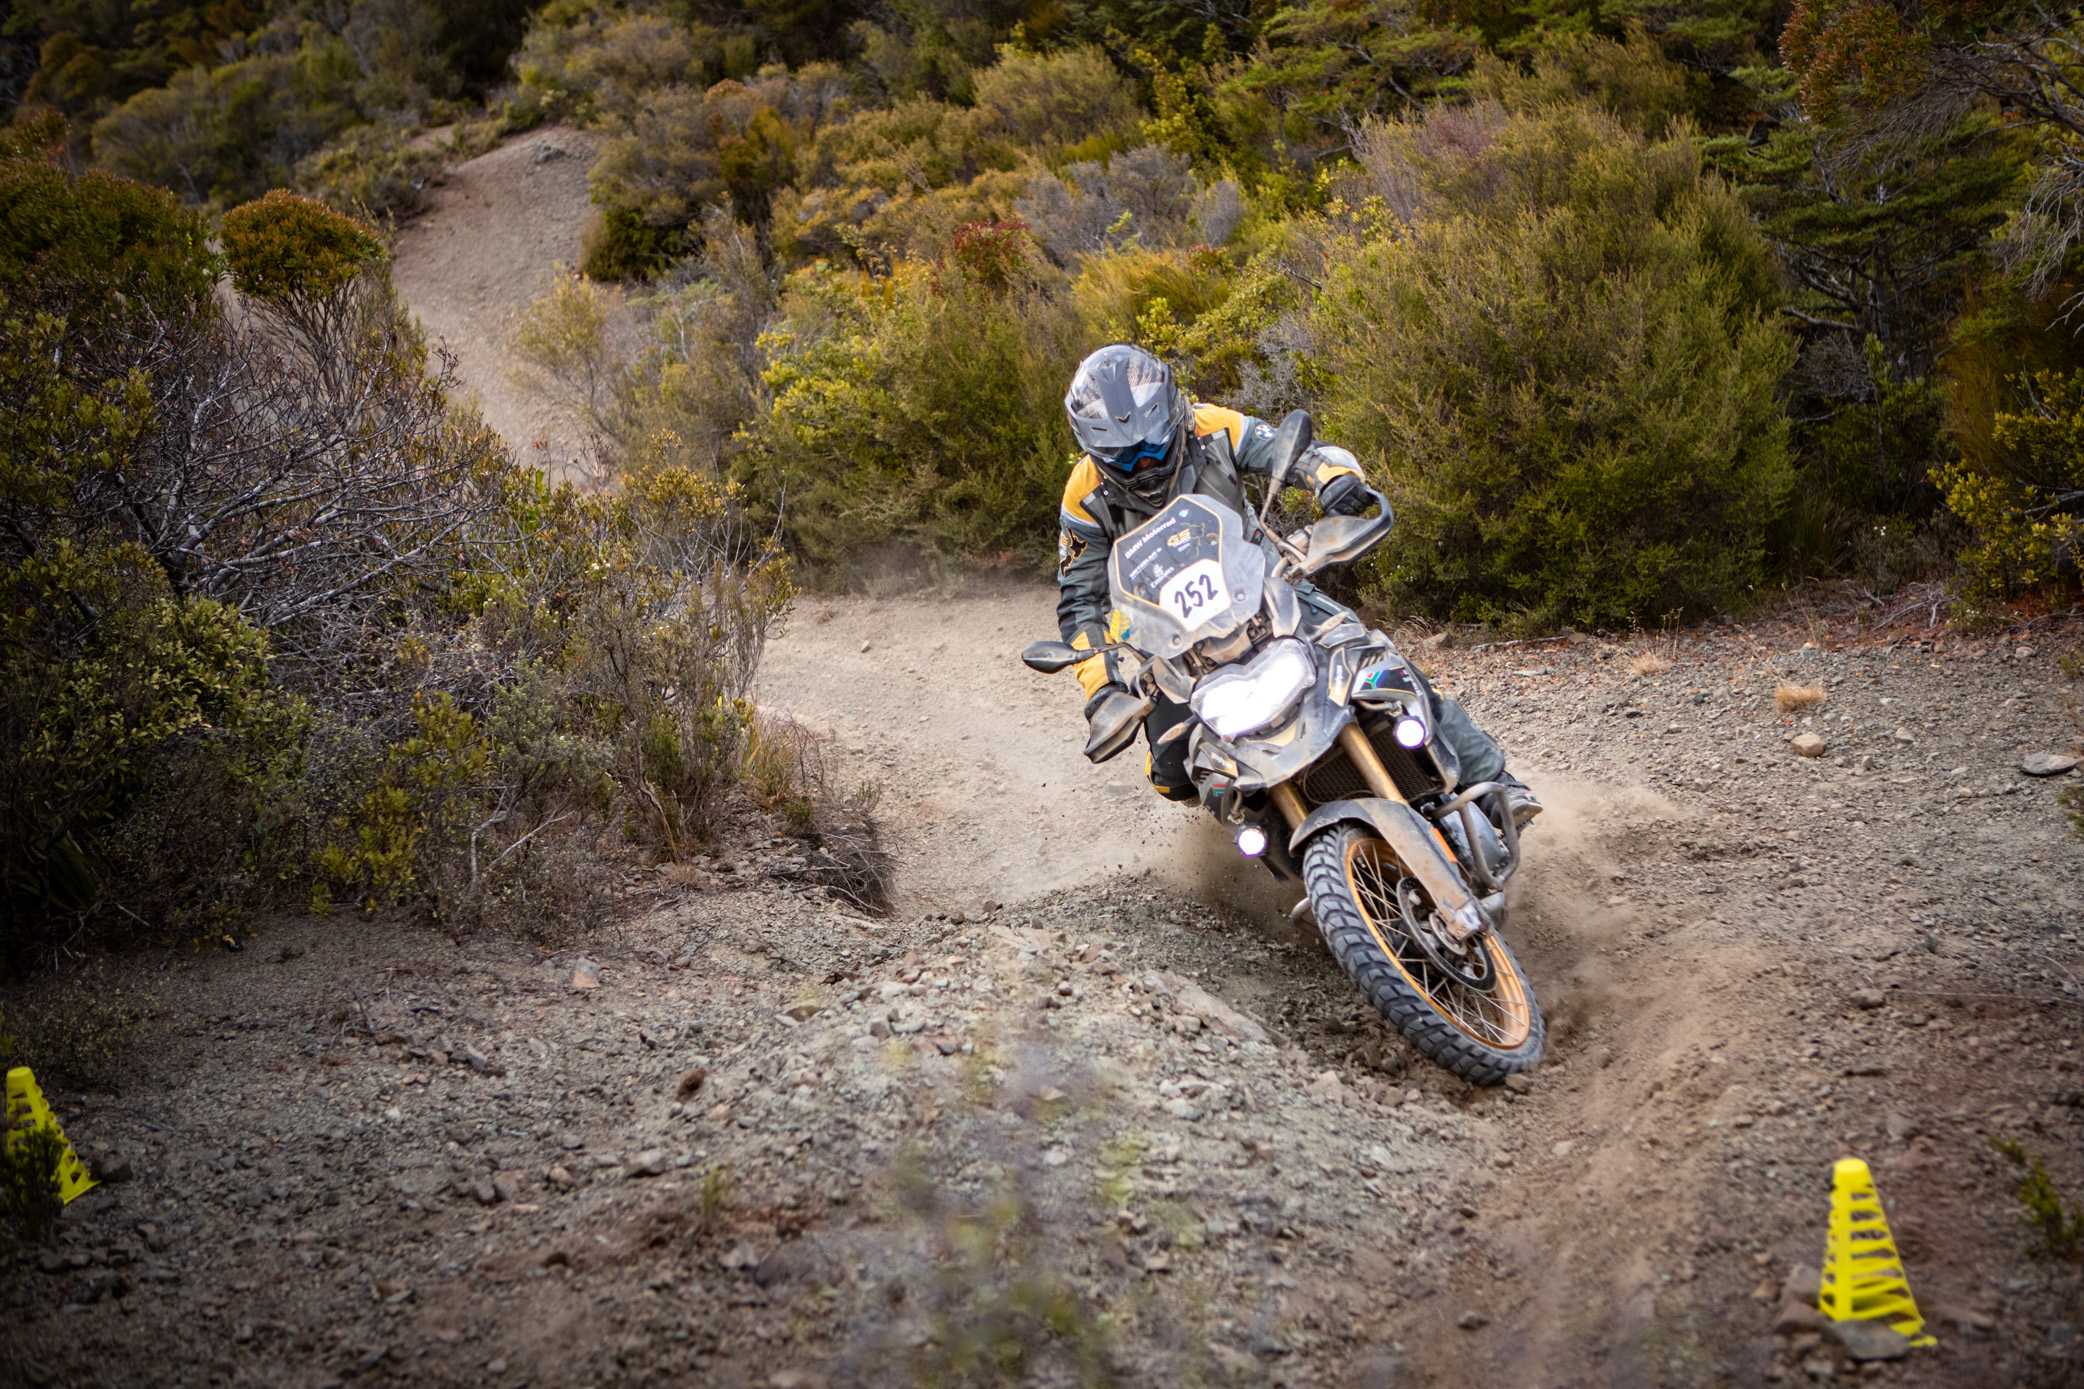 Stay-at-Home Mom to BMW GS Trophy Racer